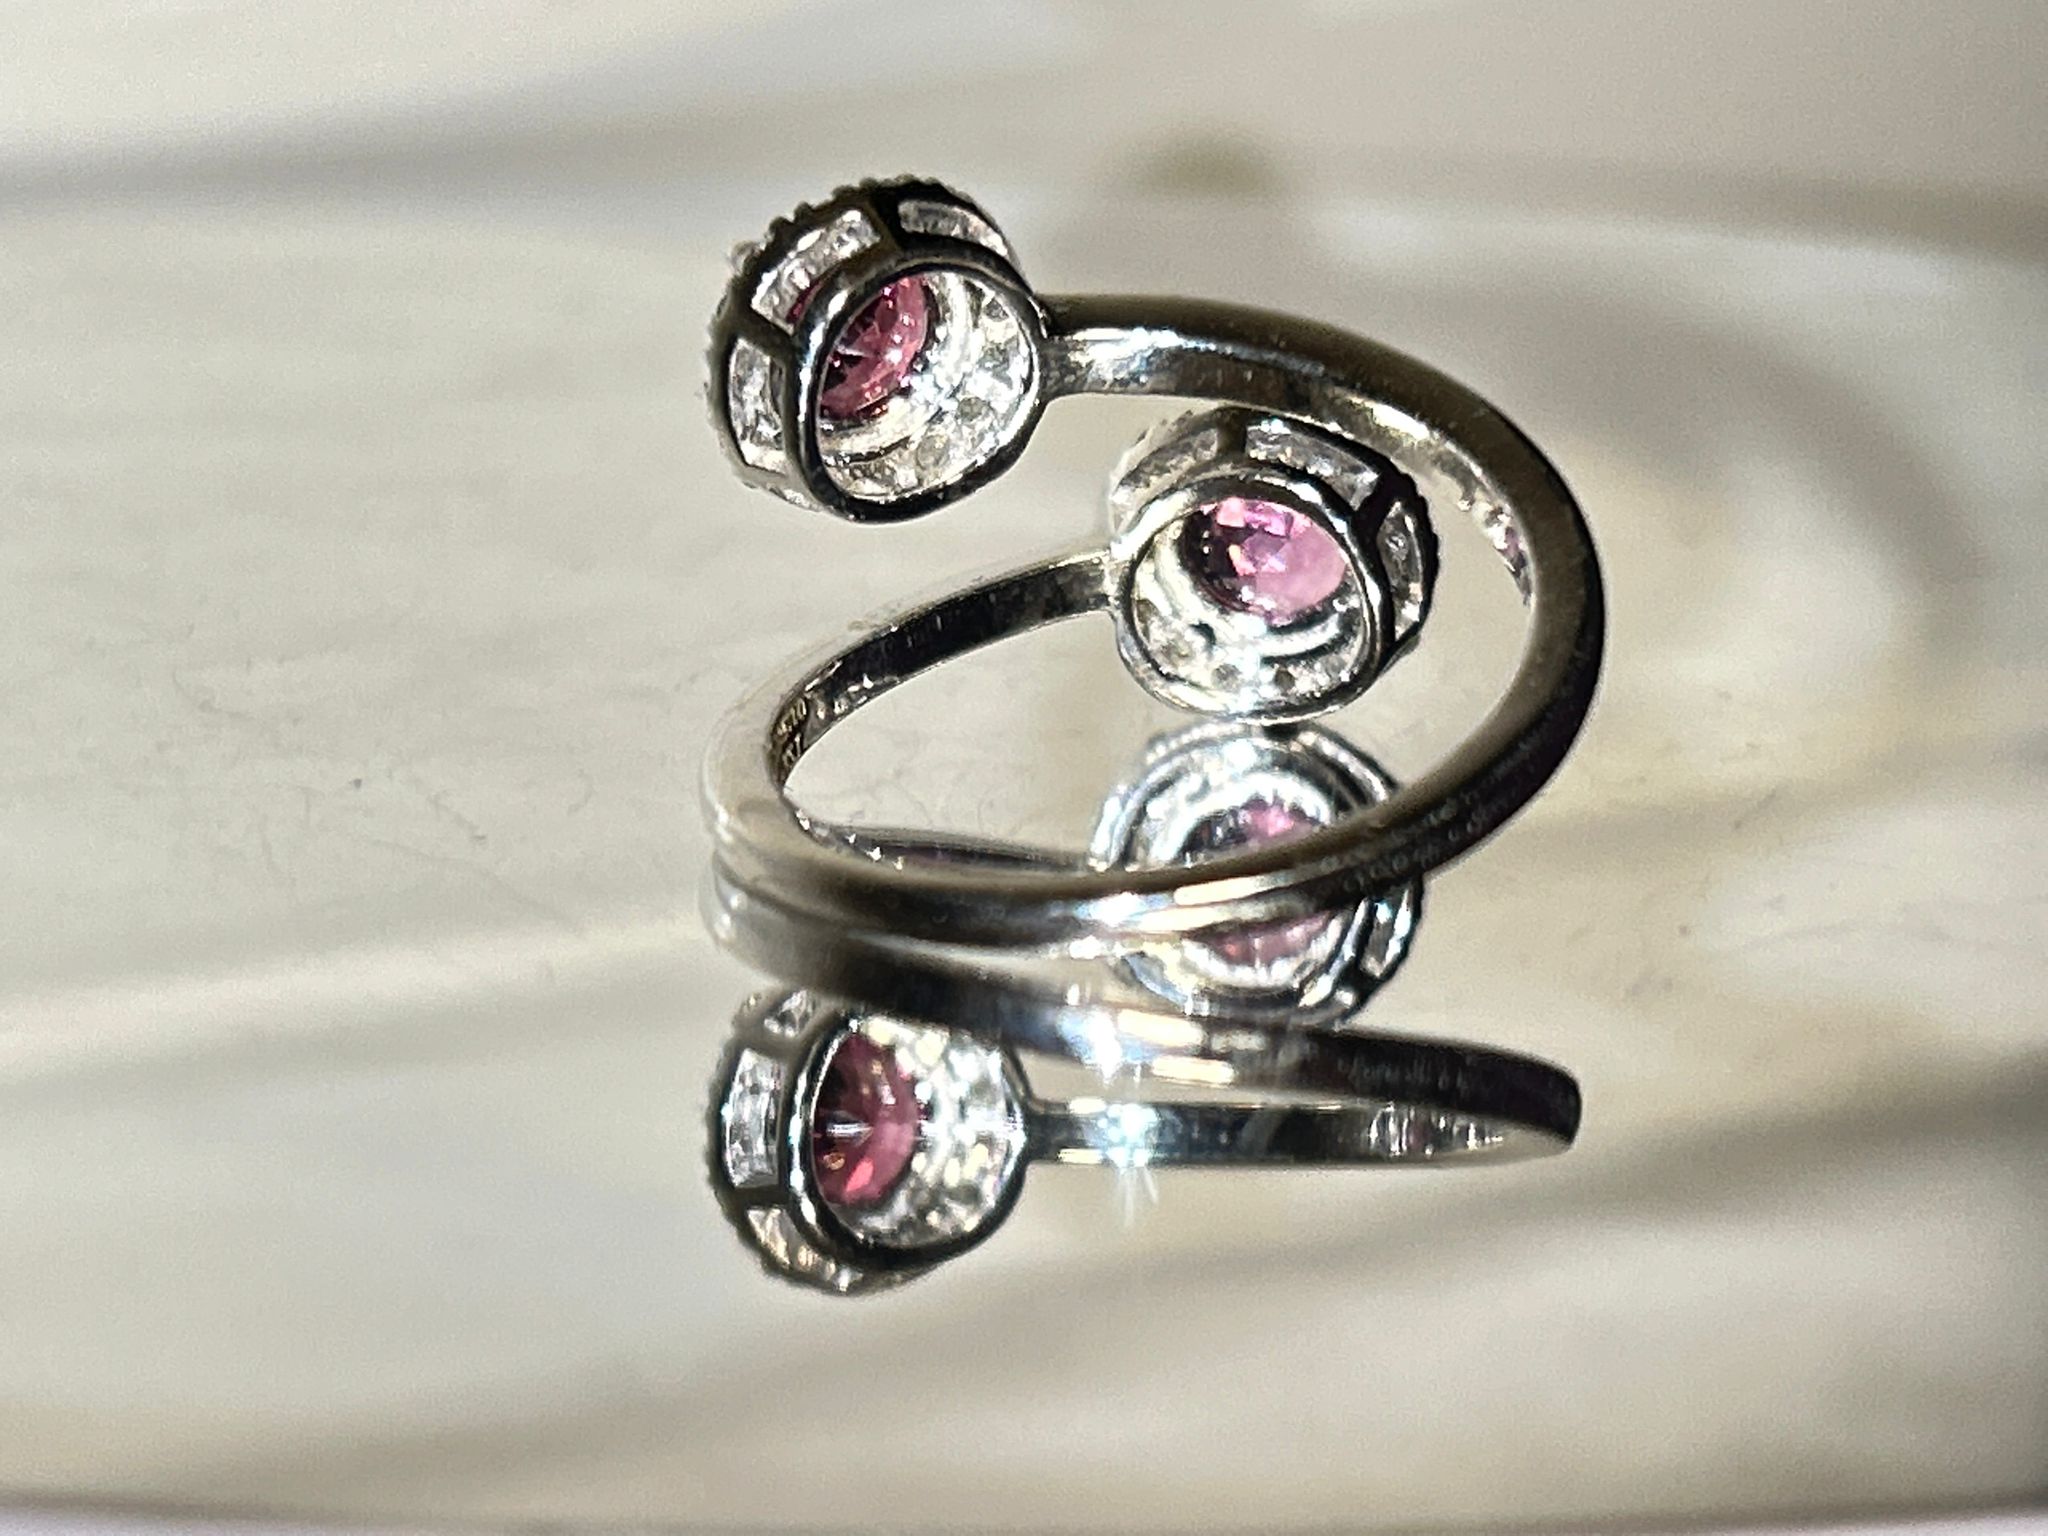 Beautiful Natural Spinel Ring With Diamonds and 18k Gold - Image 7 of 8